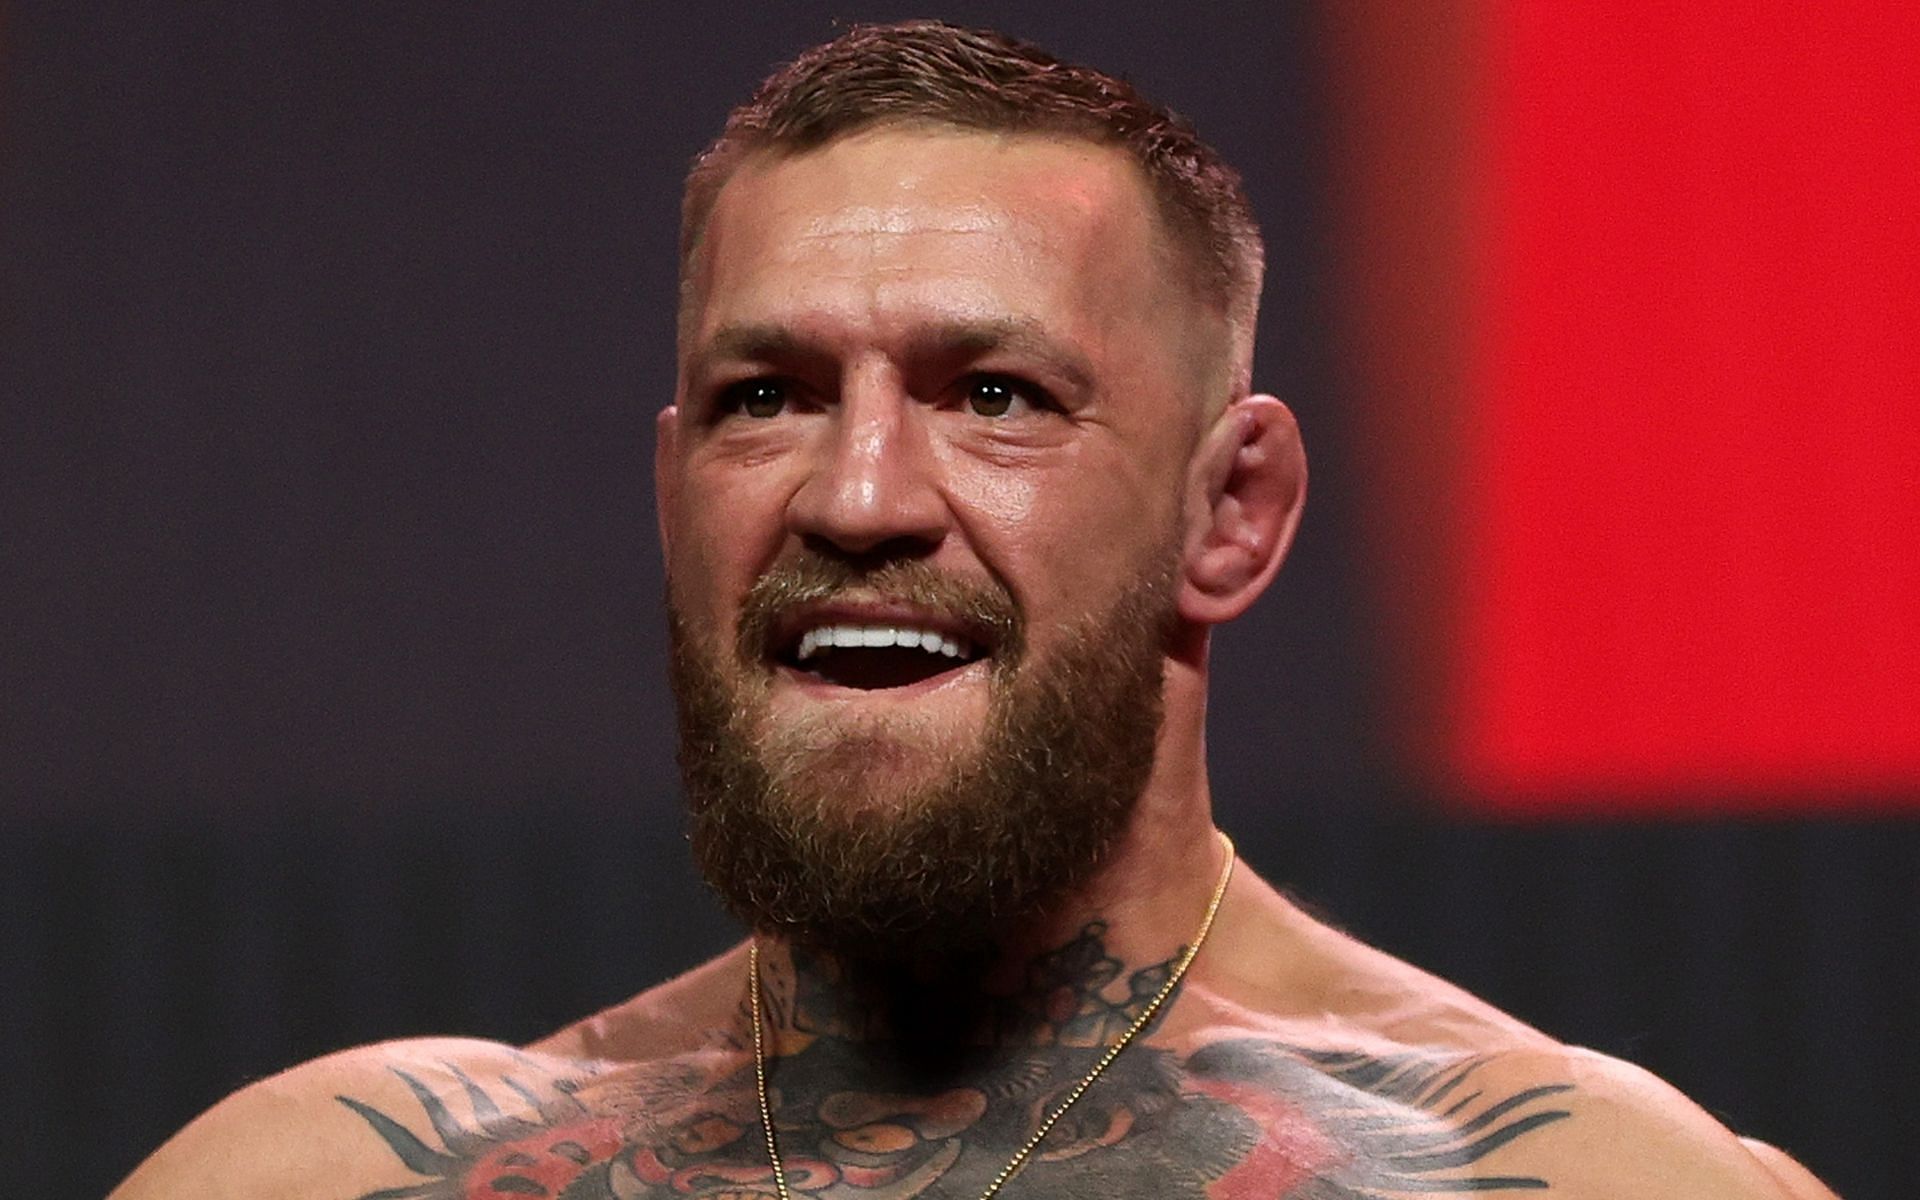 Conor McGregor is pulling out all the stops ahead of his much-awaited return